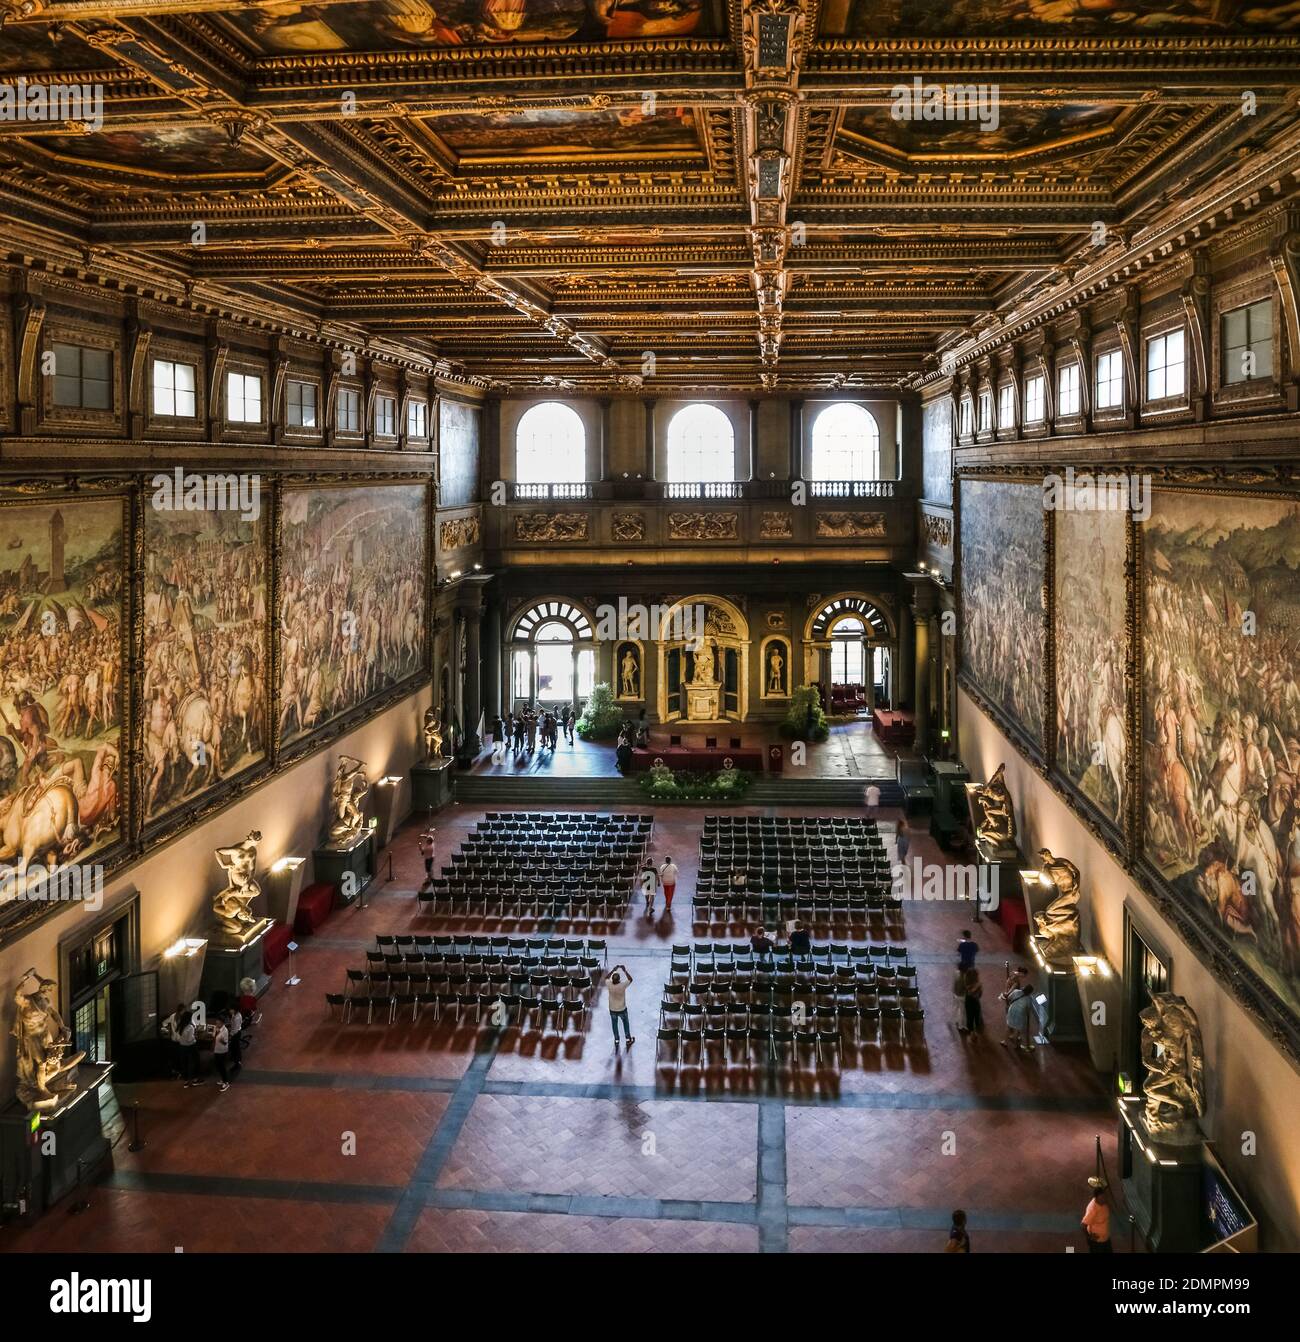 Panorama of the Salone dei Cinquecento (Hall of the Five Hundred) in the  Palazzo Vecchio. The imposing chamber with a coffered ceiling has  sculptures Stock Photo - Alamy